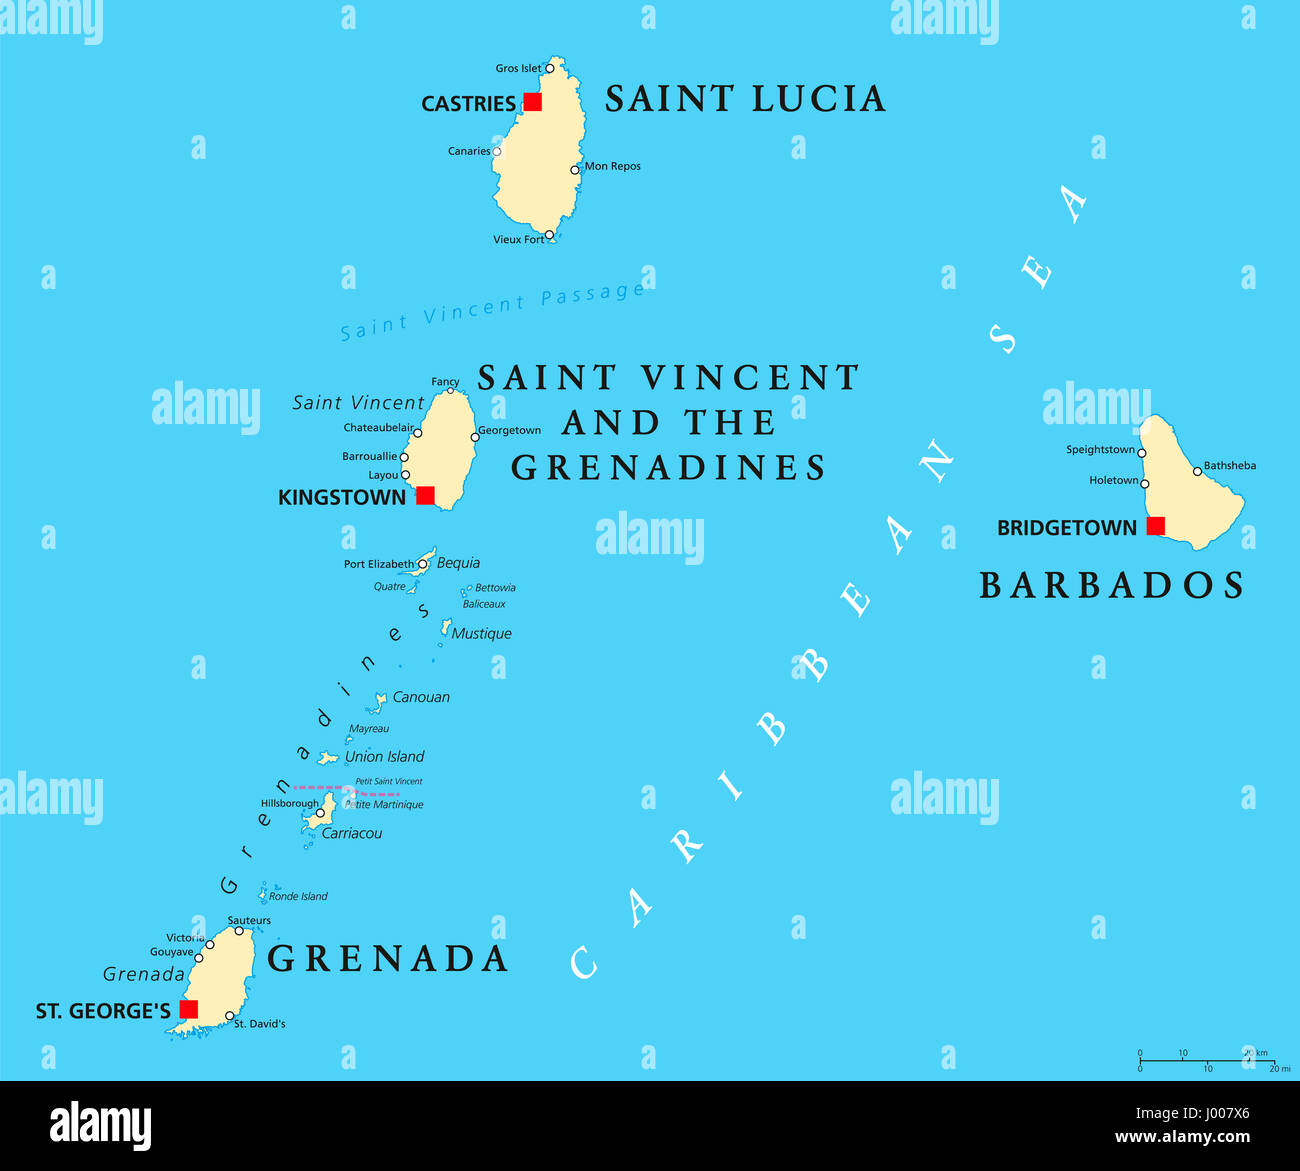 Barbados, Grenada, Saint Lucia, Saint Vincent and the Grenadines political map. Island countries in the Caribbean, part of Lesser Antilles. Stock Photo